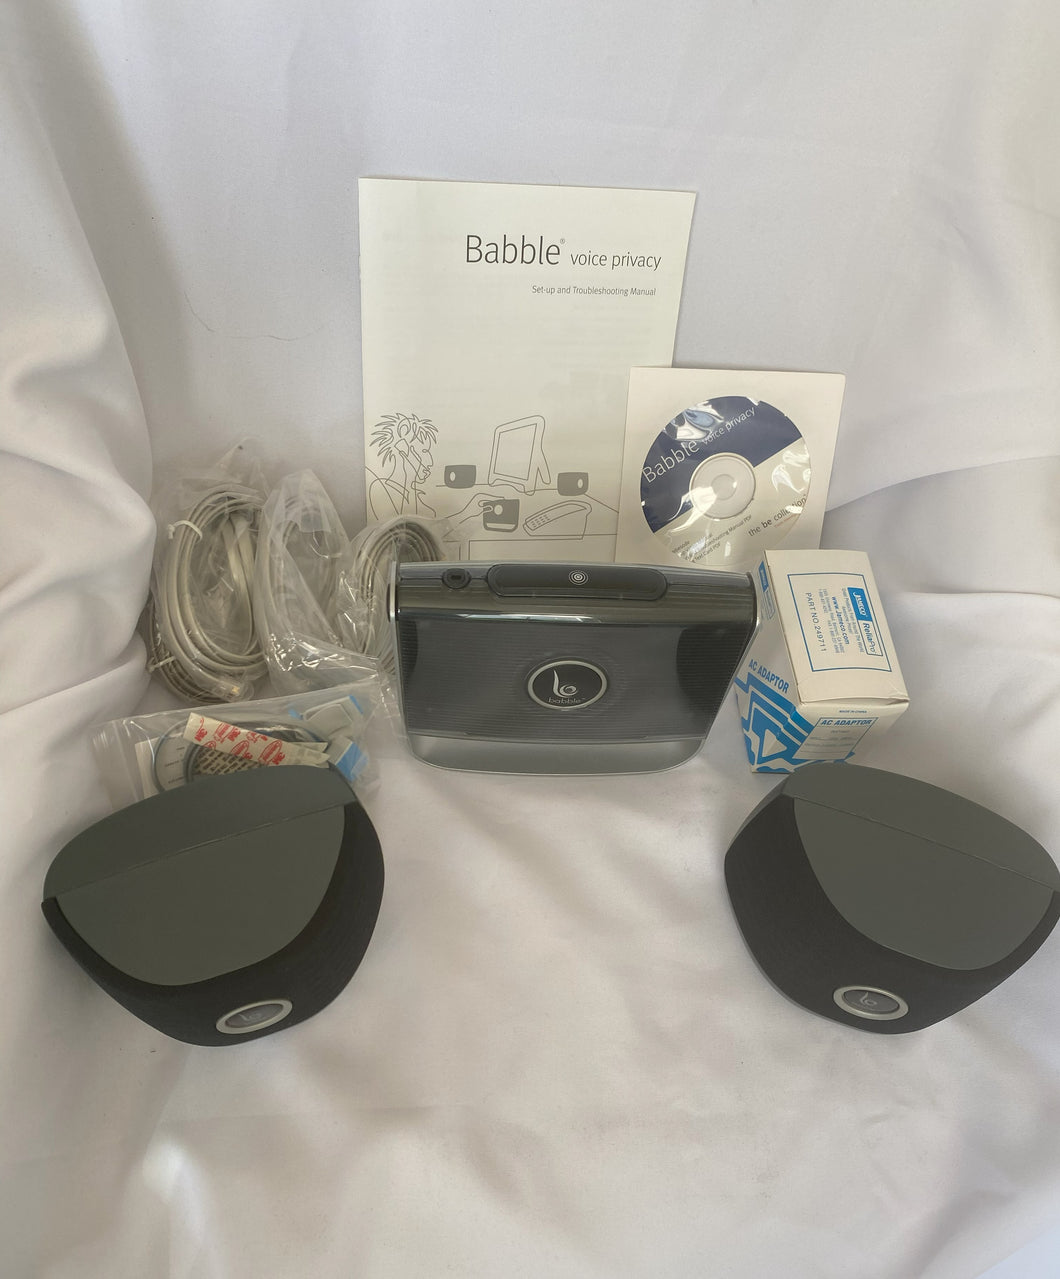 New in Box Herman Miller Babble Voice Privacy System